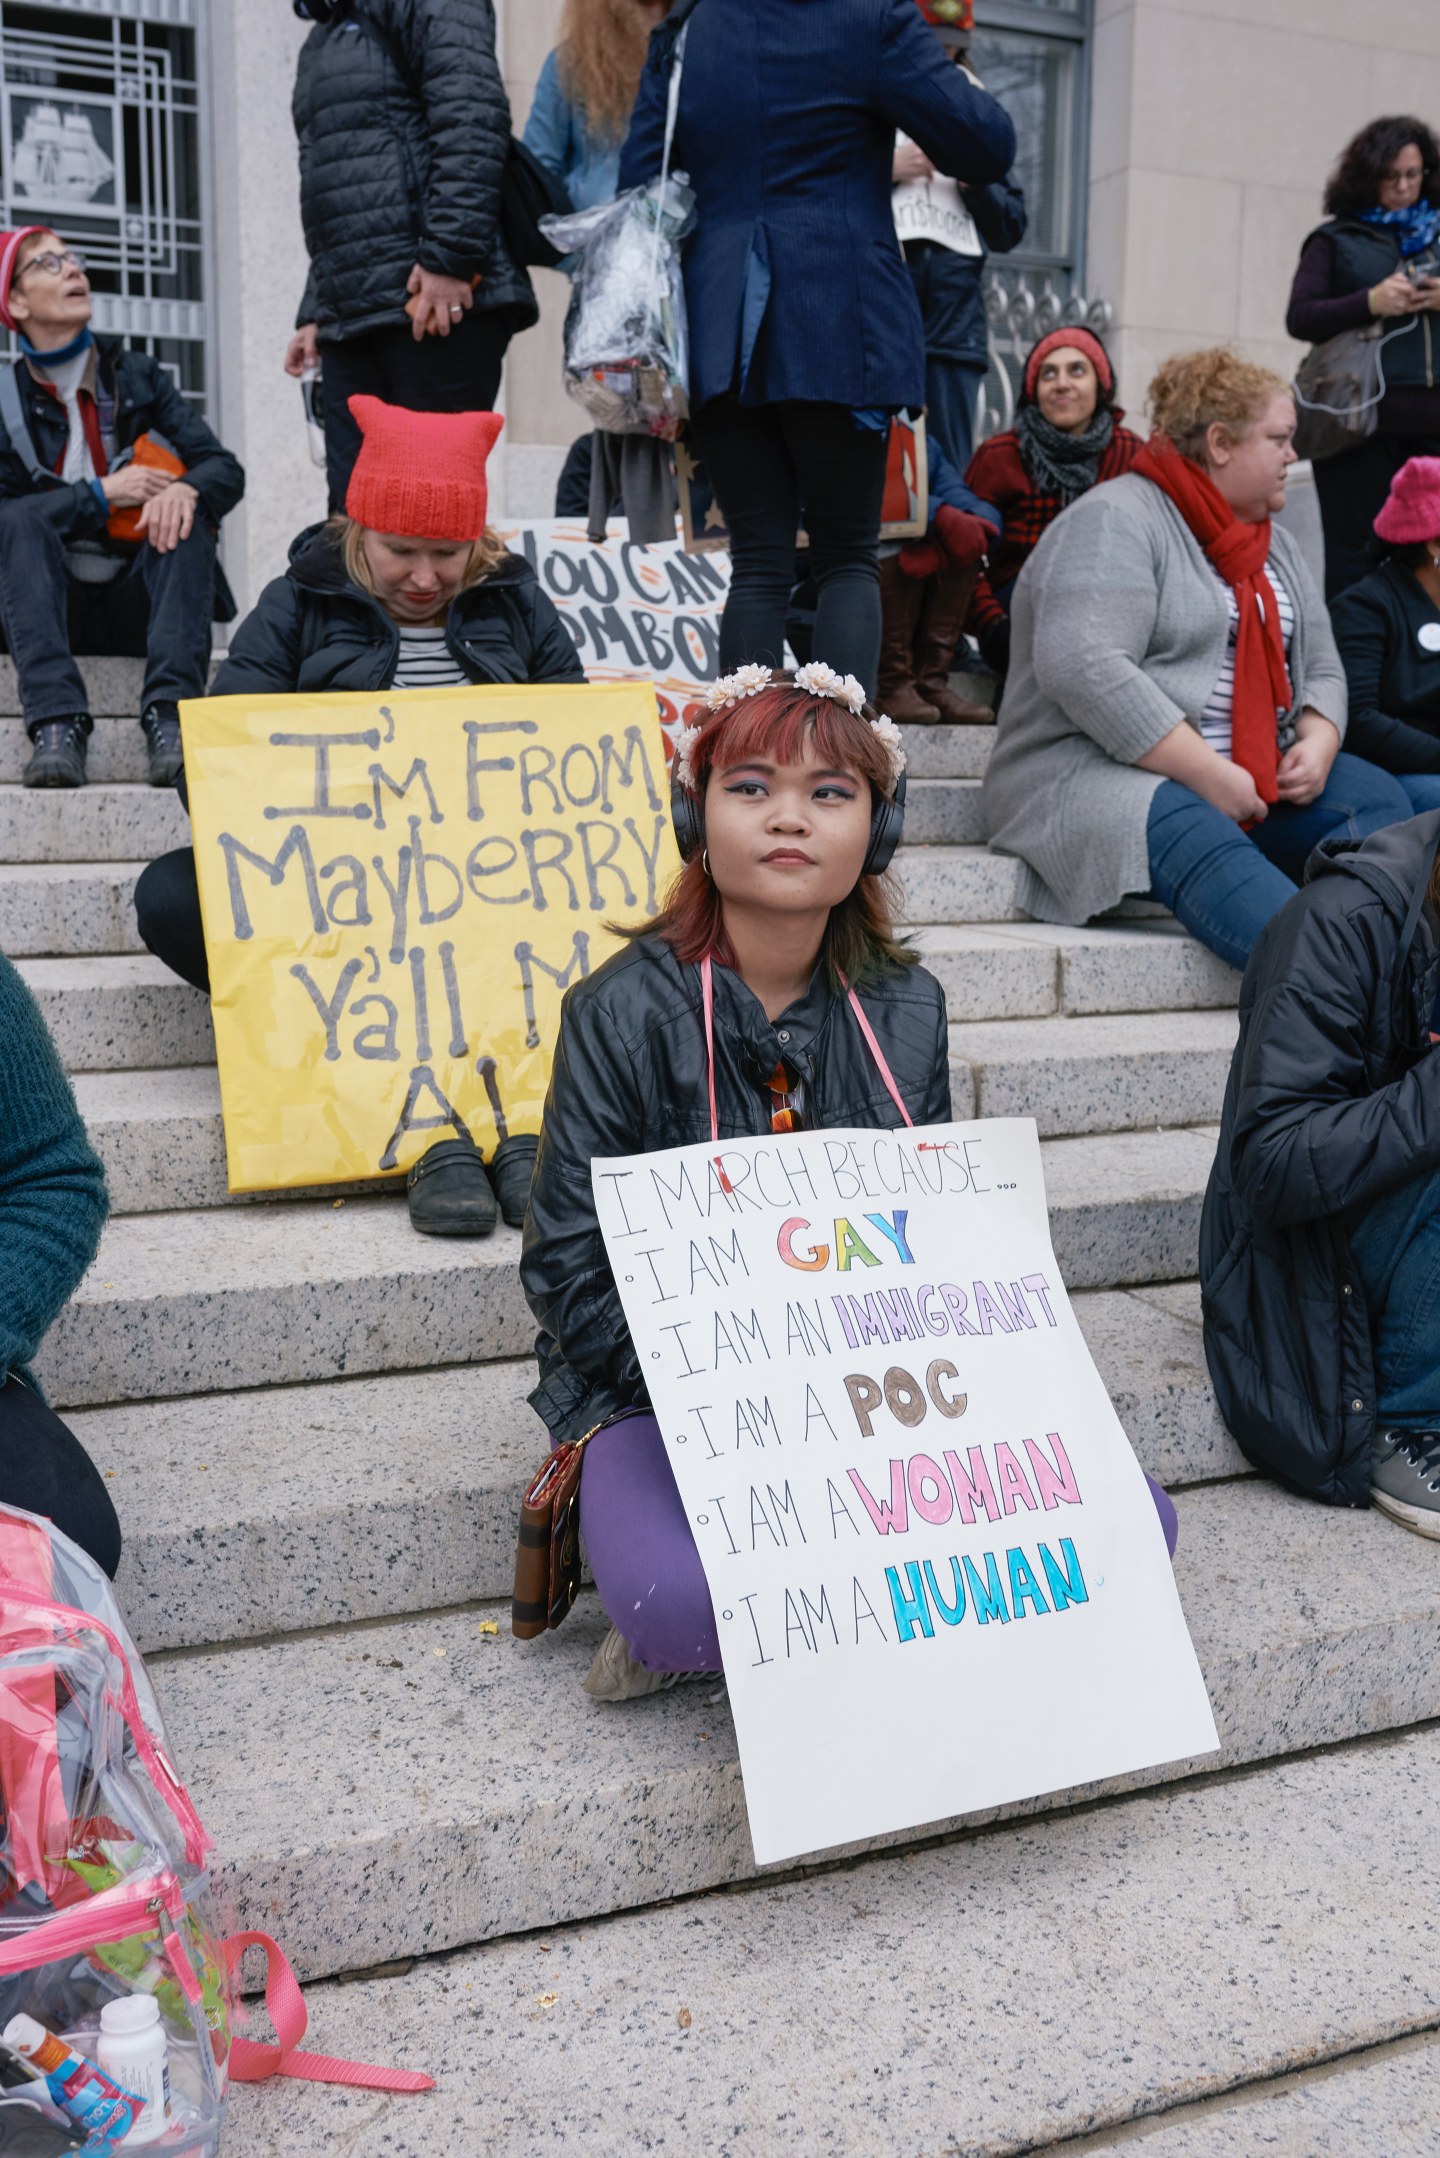 The Faces Of Resistance At Washington D.C.’s Women’s March